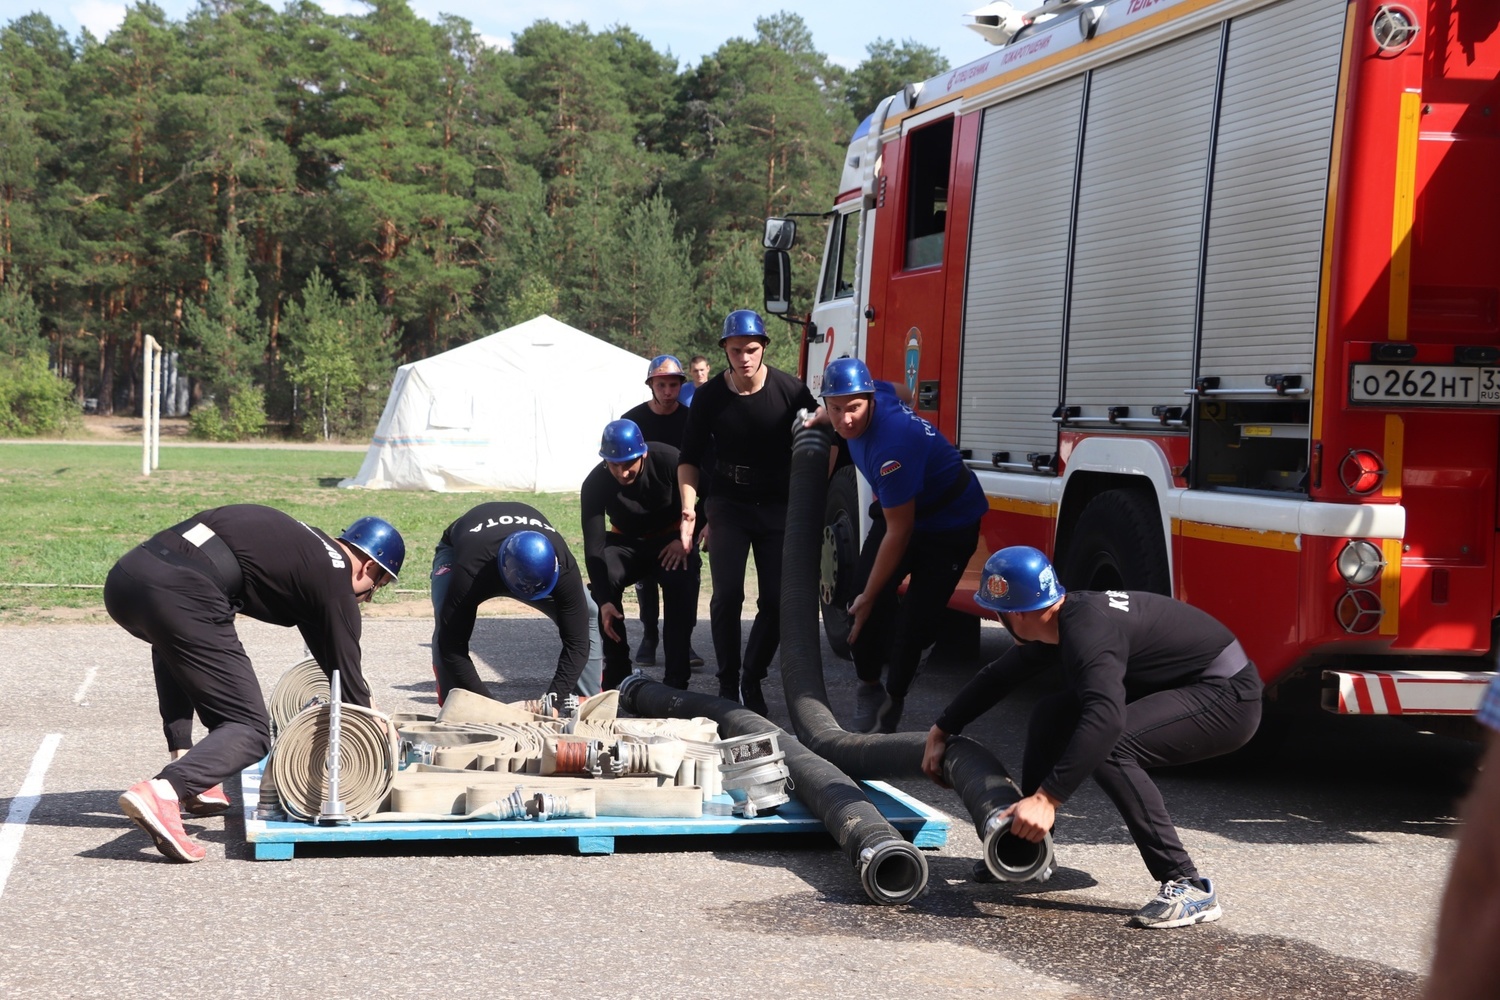 Competitions in fire and rescue sports took place in Vladimir